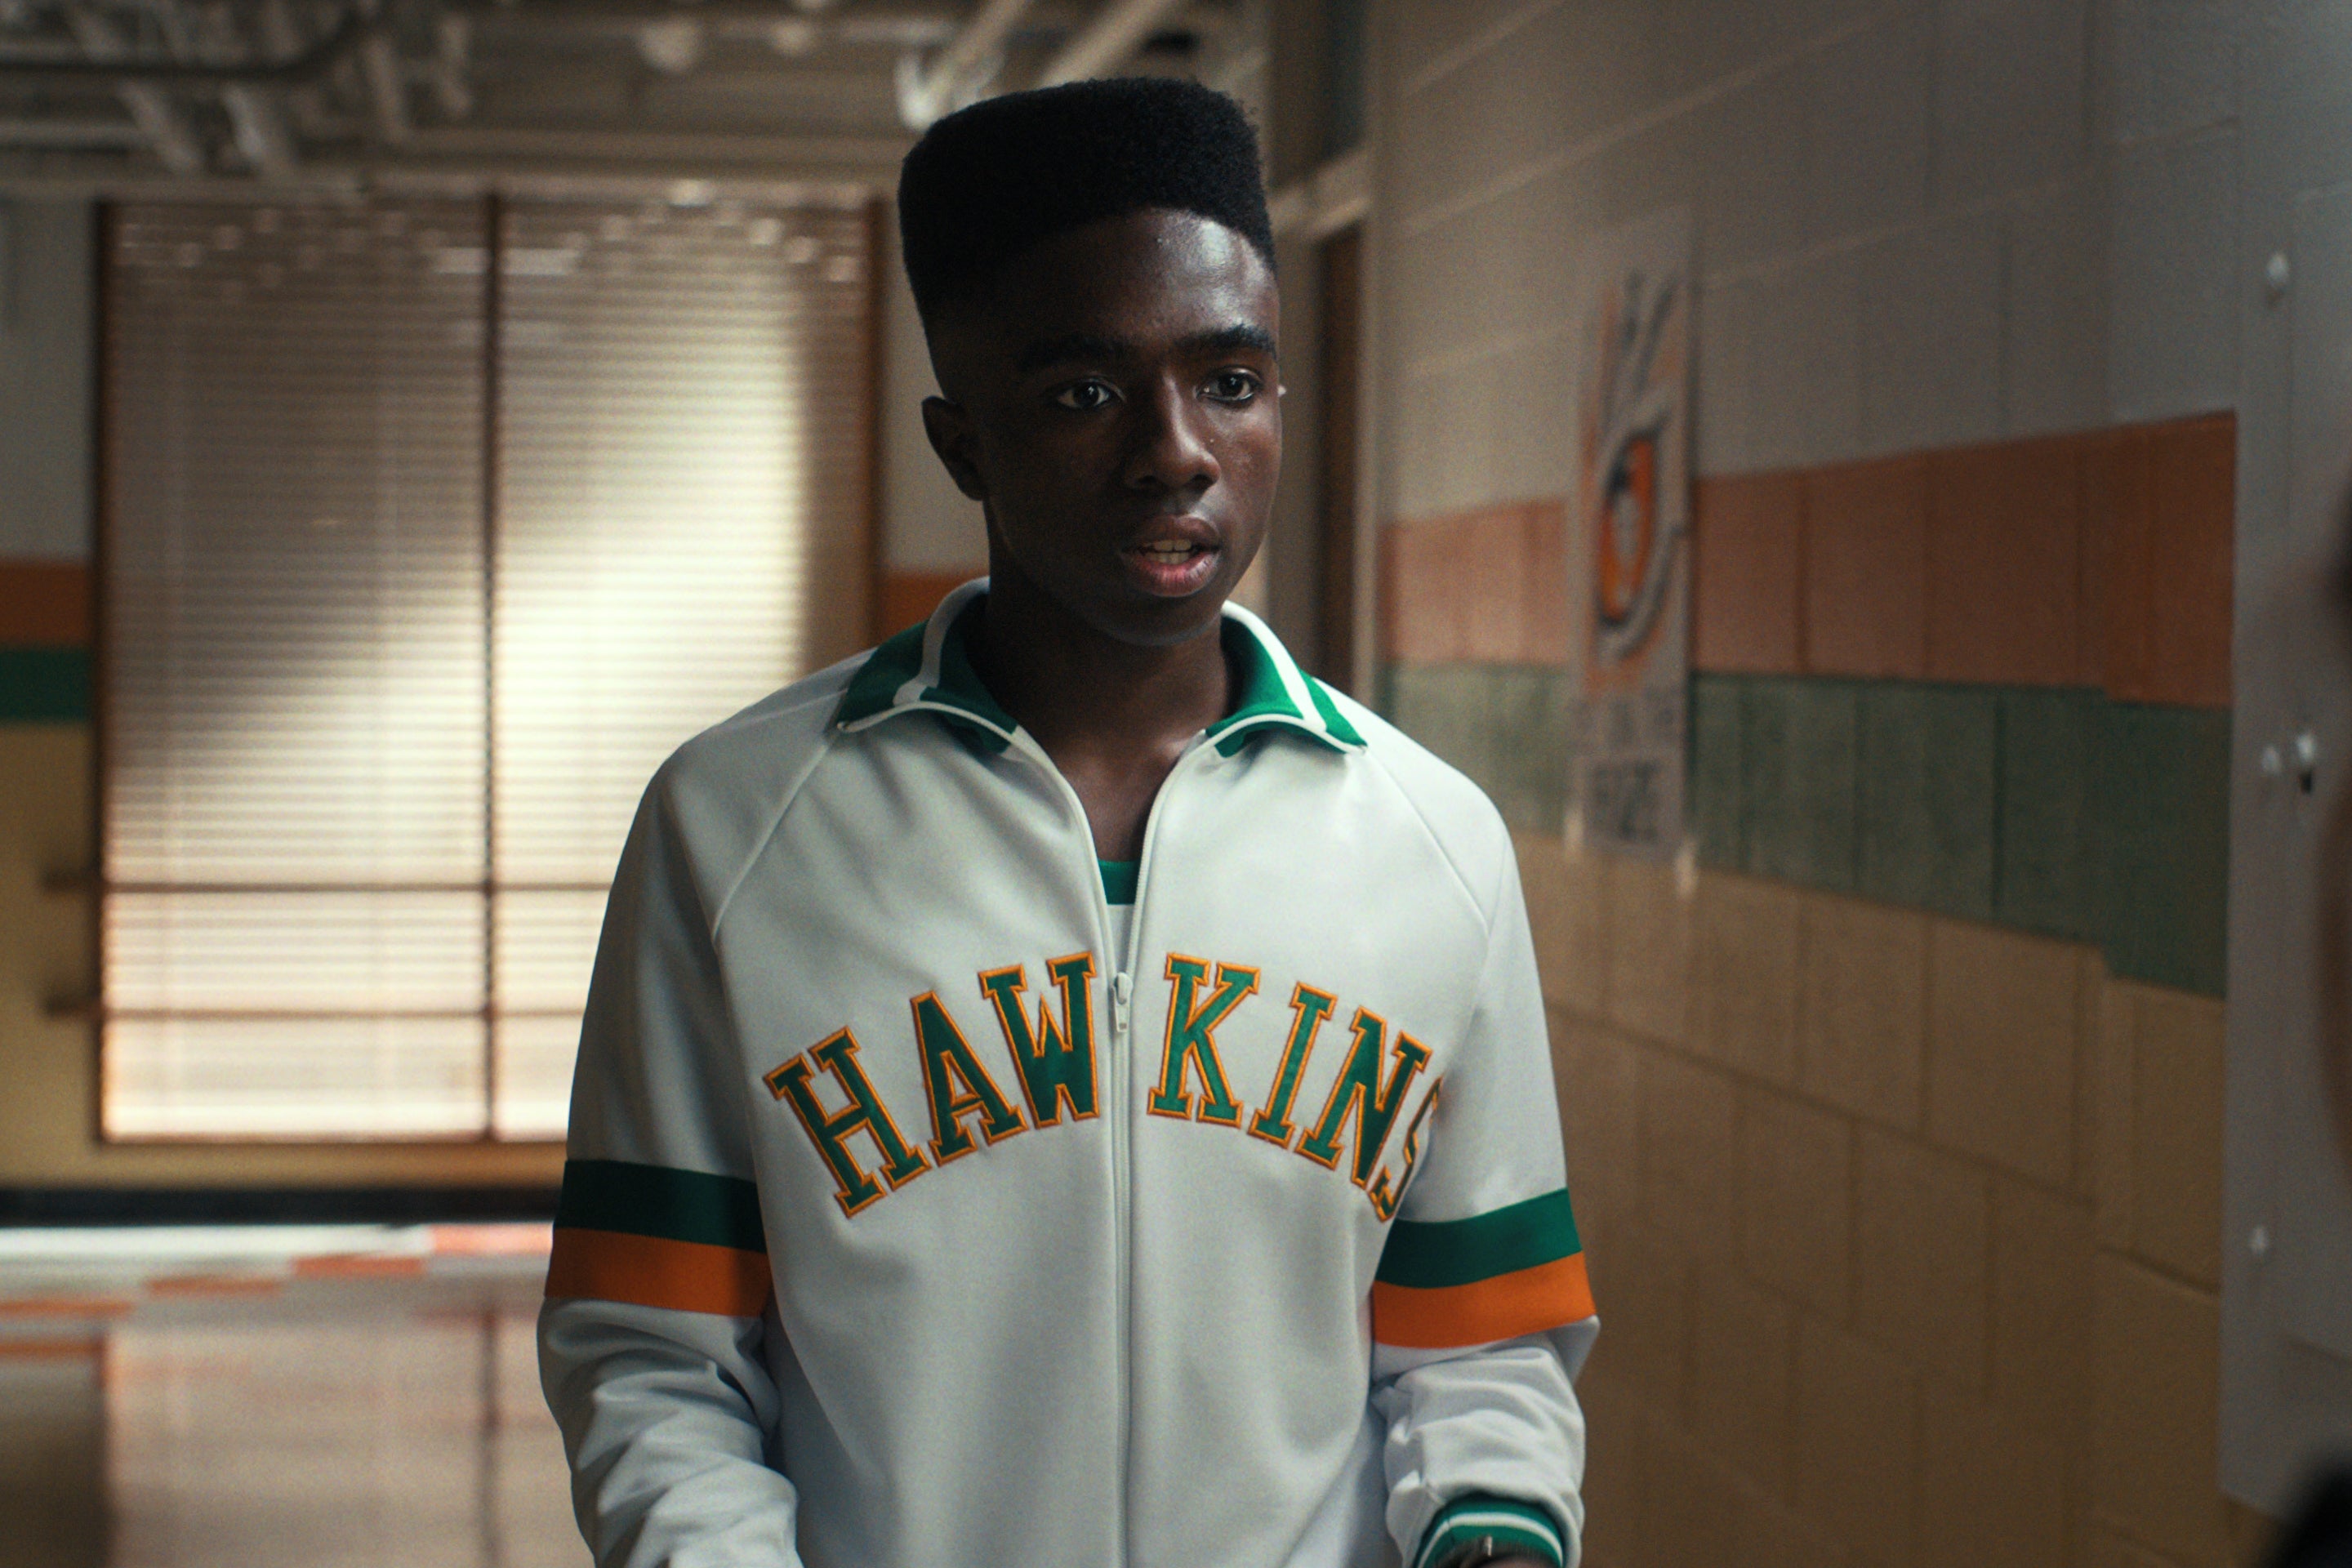 Lucas stands in a high school hallway wearing his basketball warmup jacket.